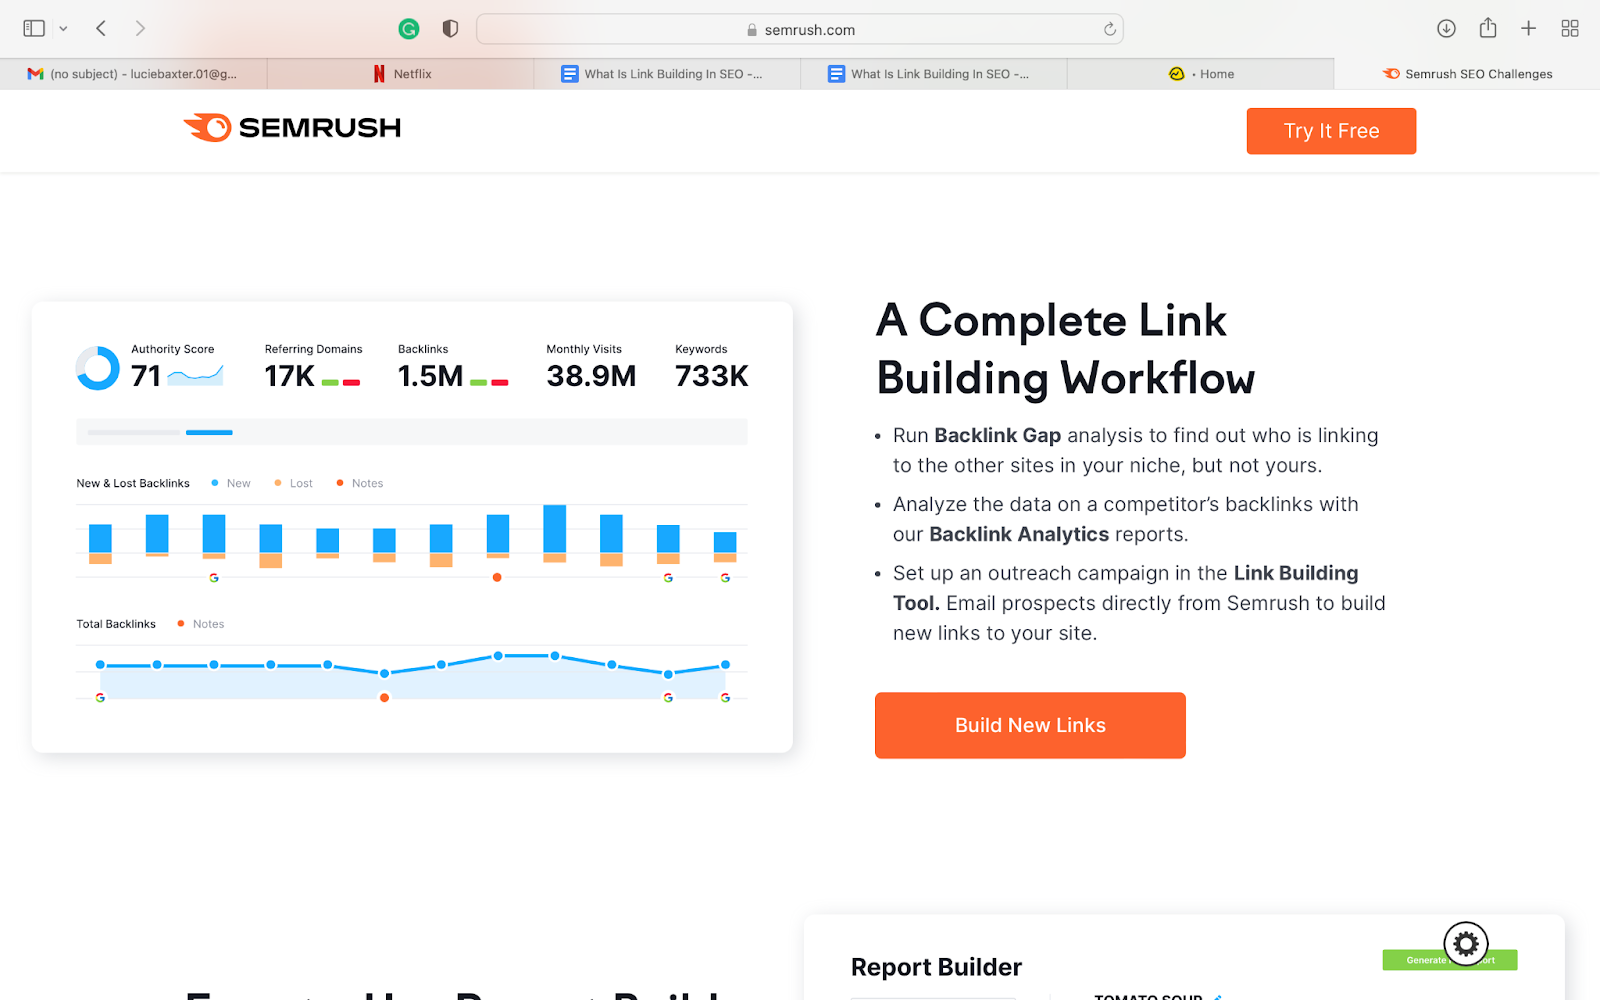 What Is Link Building in SEO? 5 Tips For Staying Ahead Of The Competition